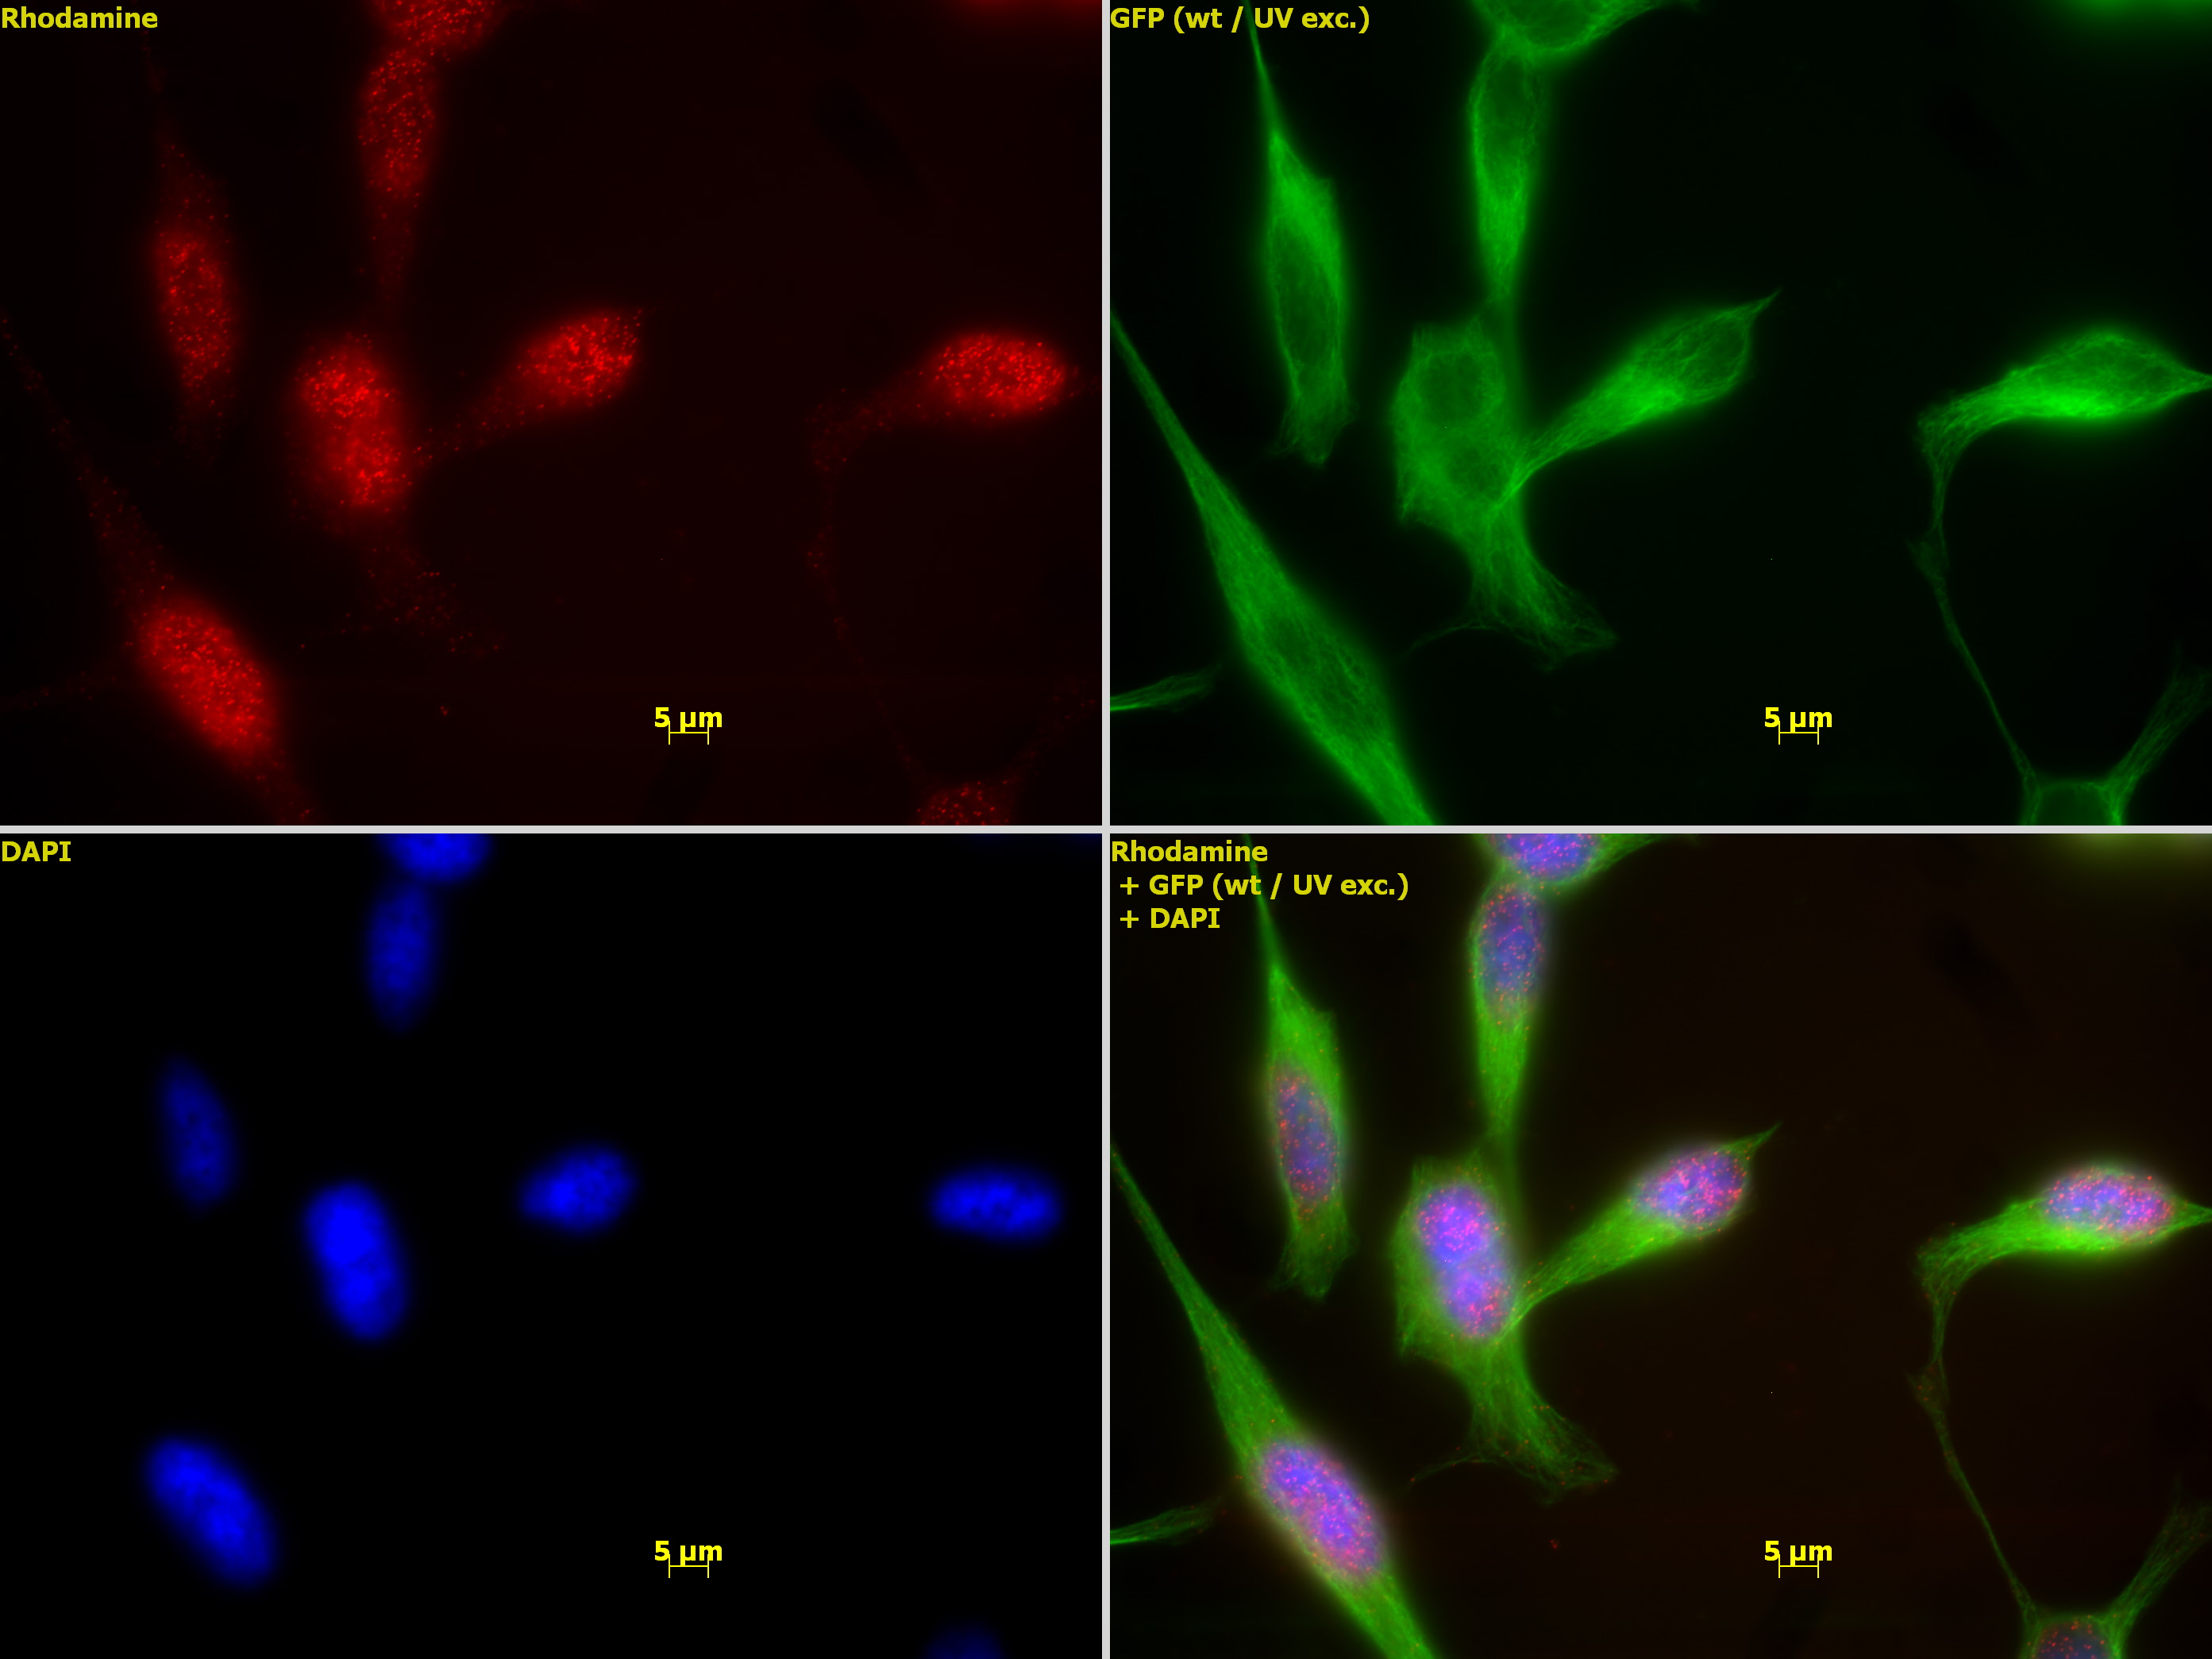 HDAC1 antibody (mAb) (Clone 10E2) tested by immunofluorescence. Top left: HeLa cells stained with HDAC1 antibody (mAb) (Clone 10E2) (1:1,000). Top right: Same cells stained with alpha Tubulin mAb (Clone 5-B-1-2). Bottom left: Same cells stained with DAPI. Bottom right: Merge of all 3 images.